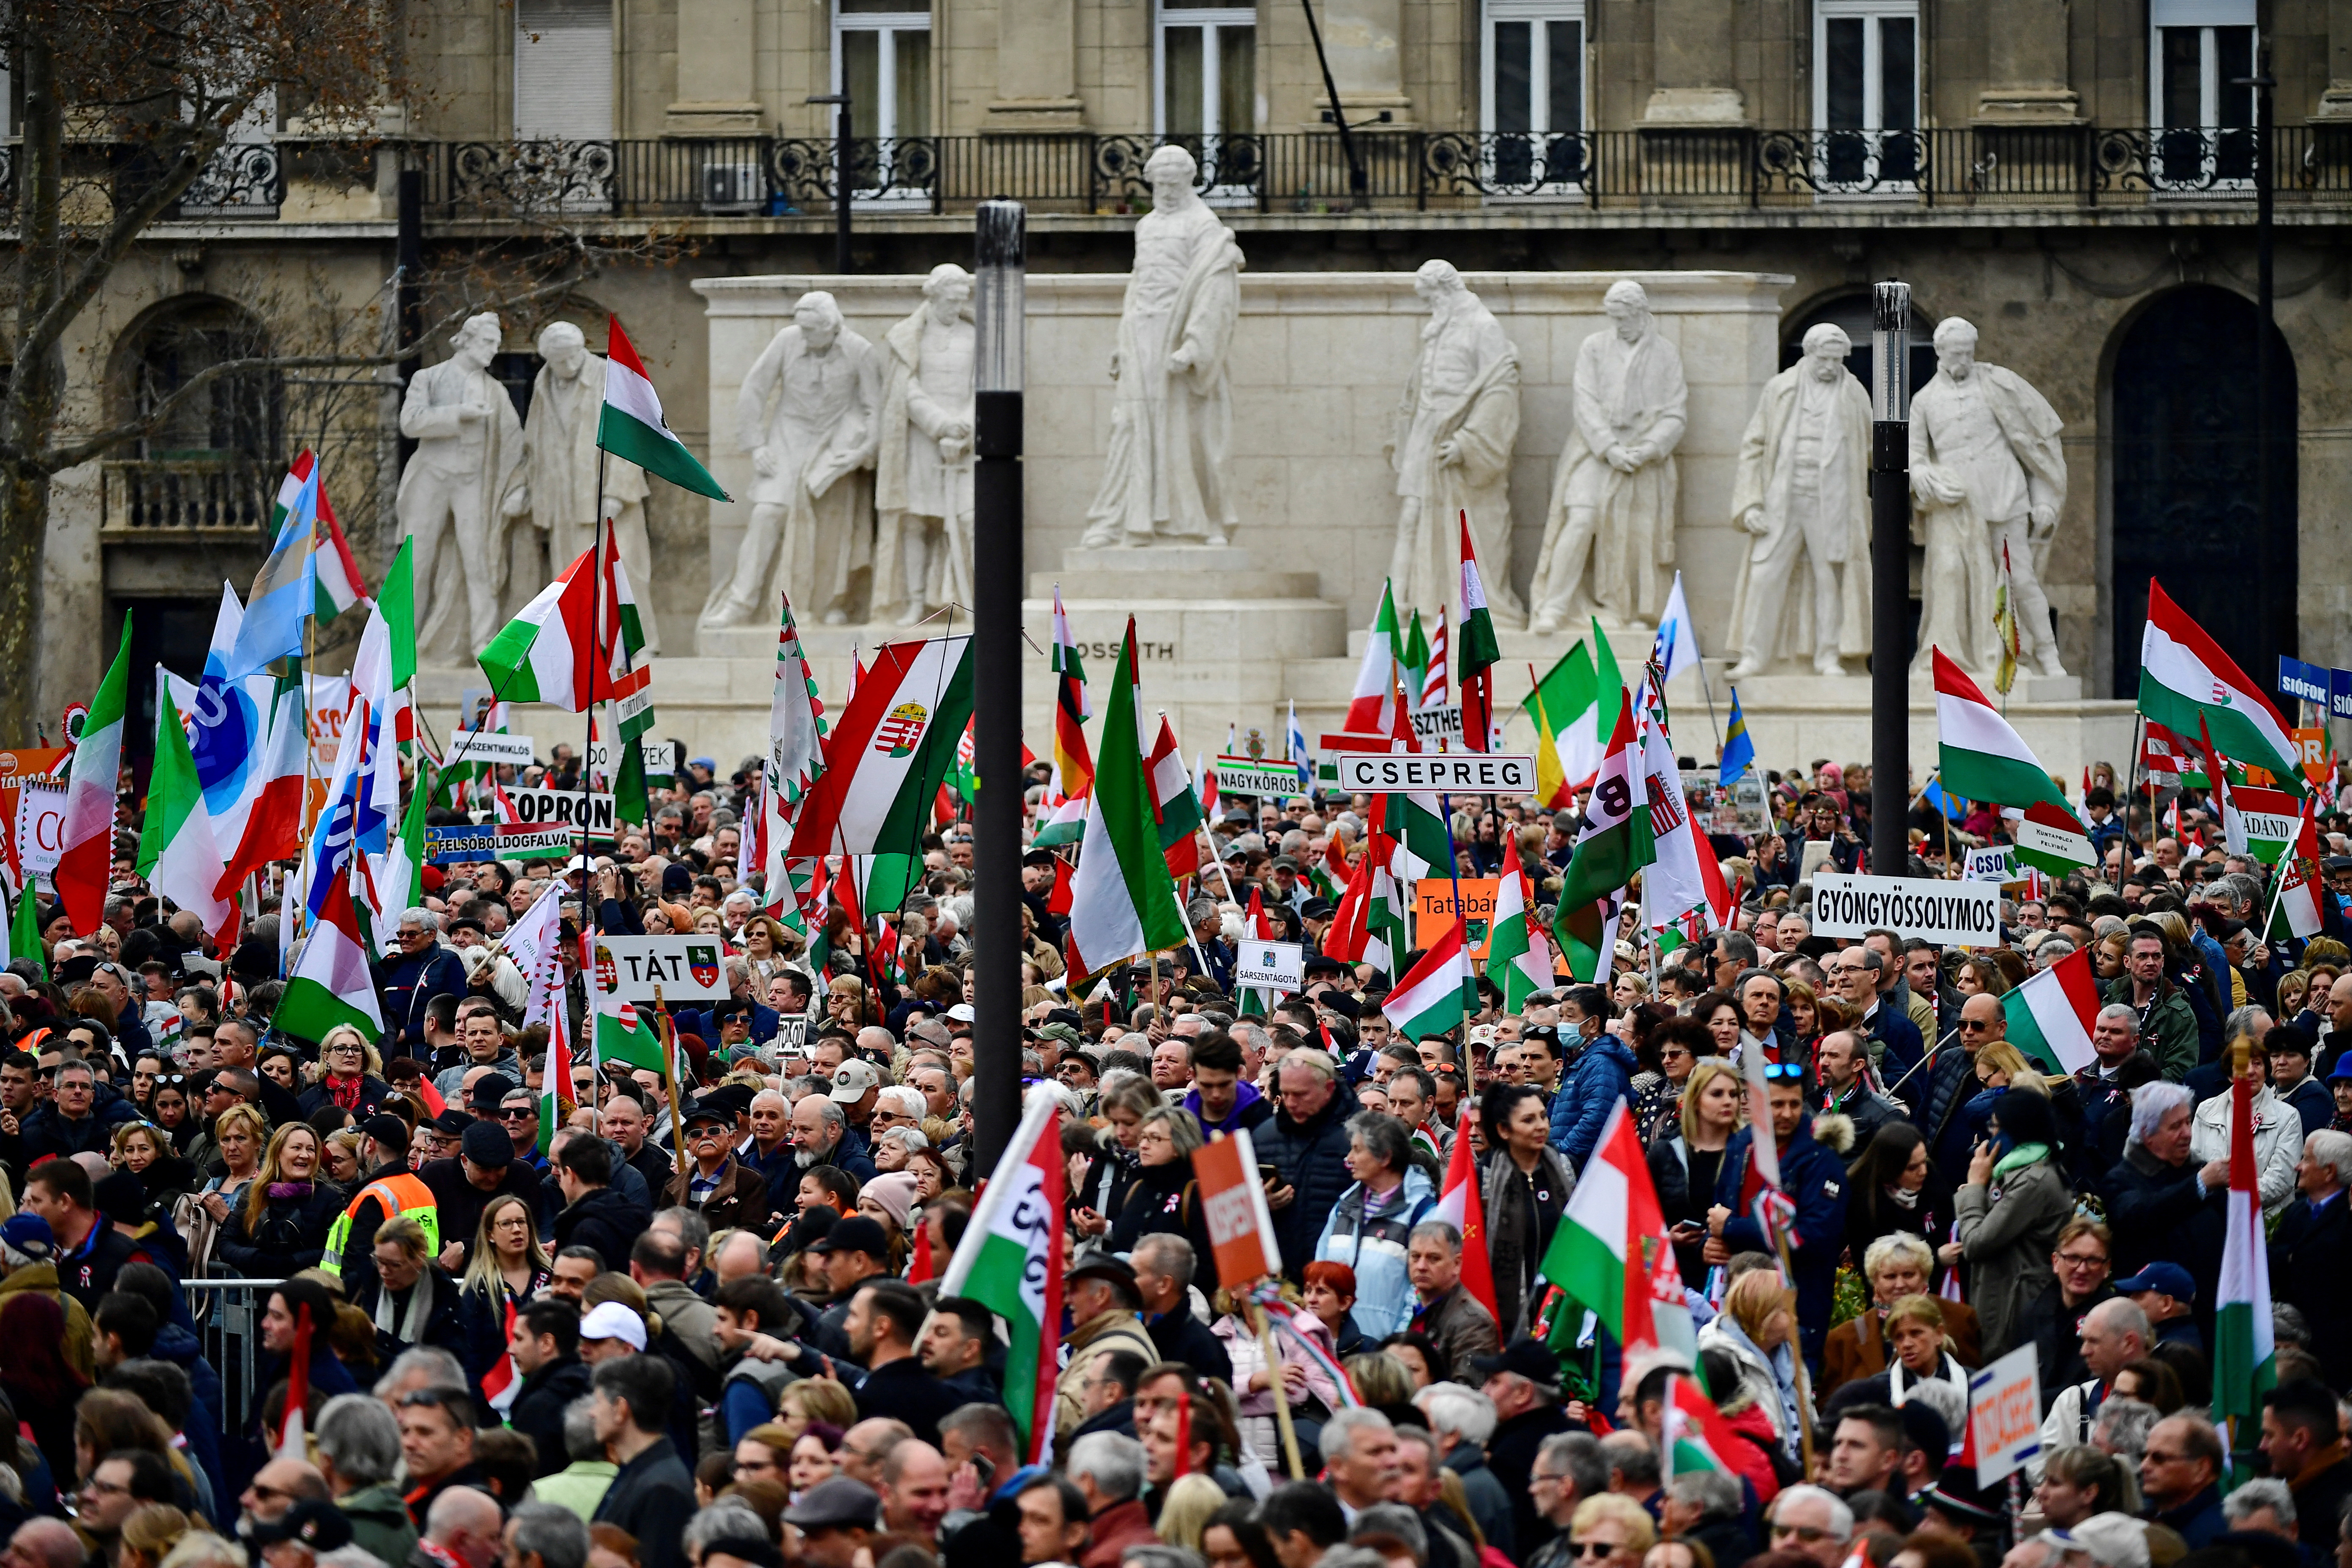 Hungary's National Day celebrations, in Budapest